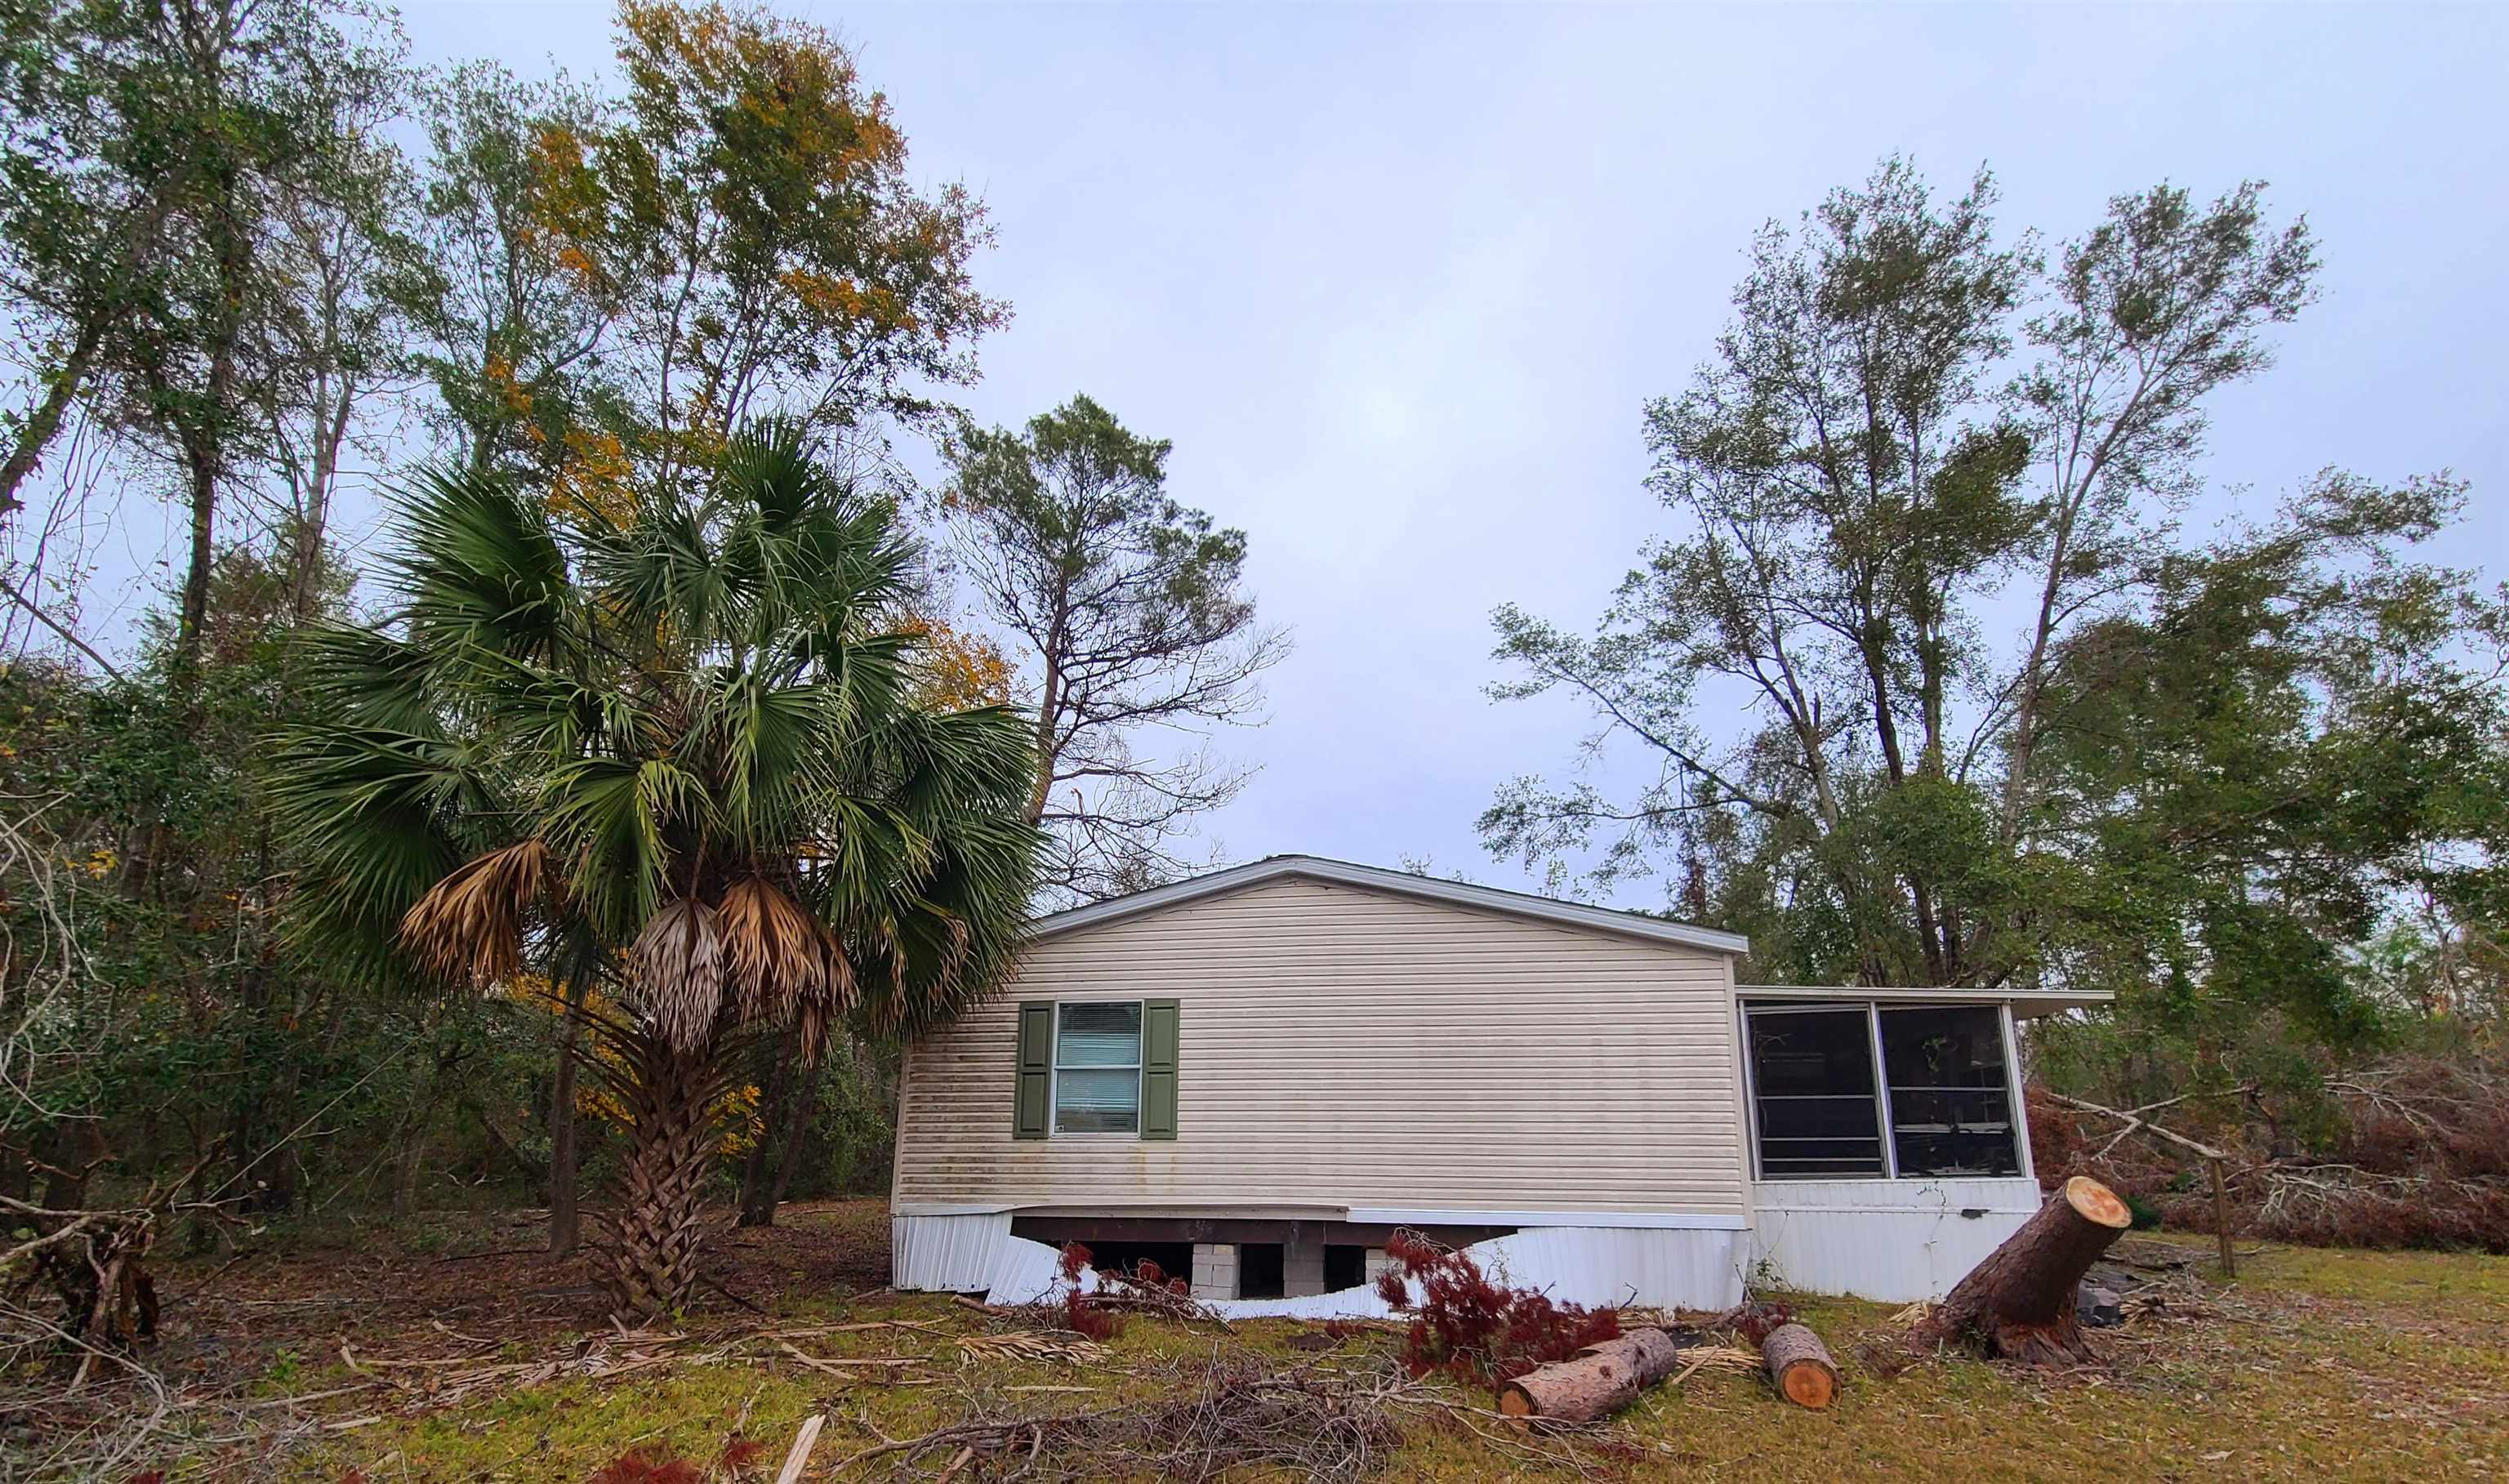 12592 Strickland Landing,PERRY,Florida 32348,Lots and land,Strickland Landing,366277